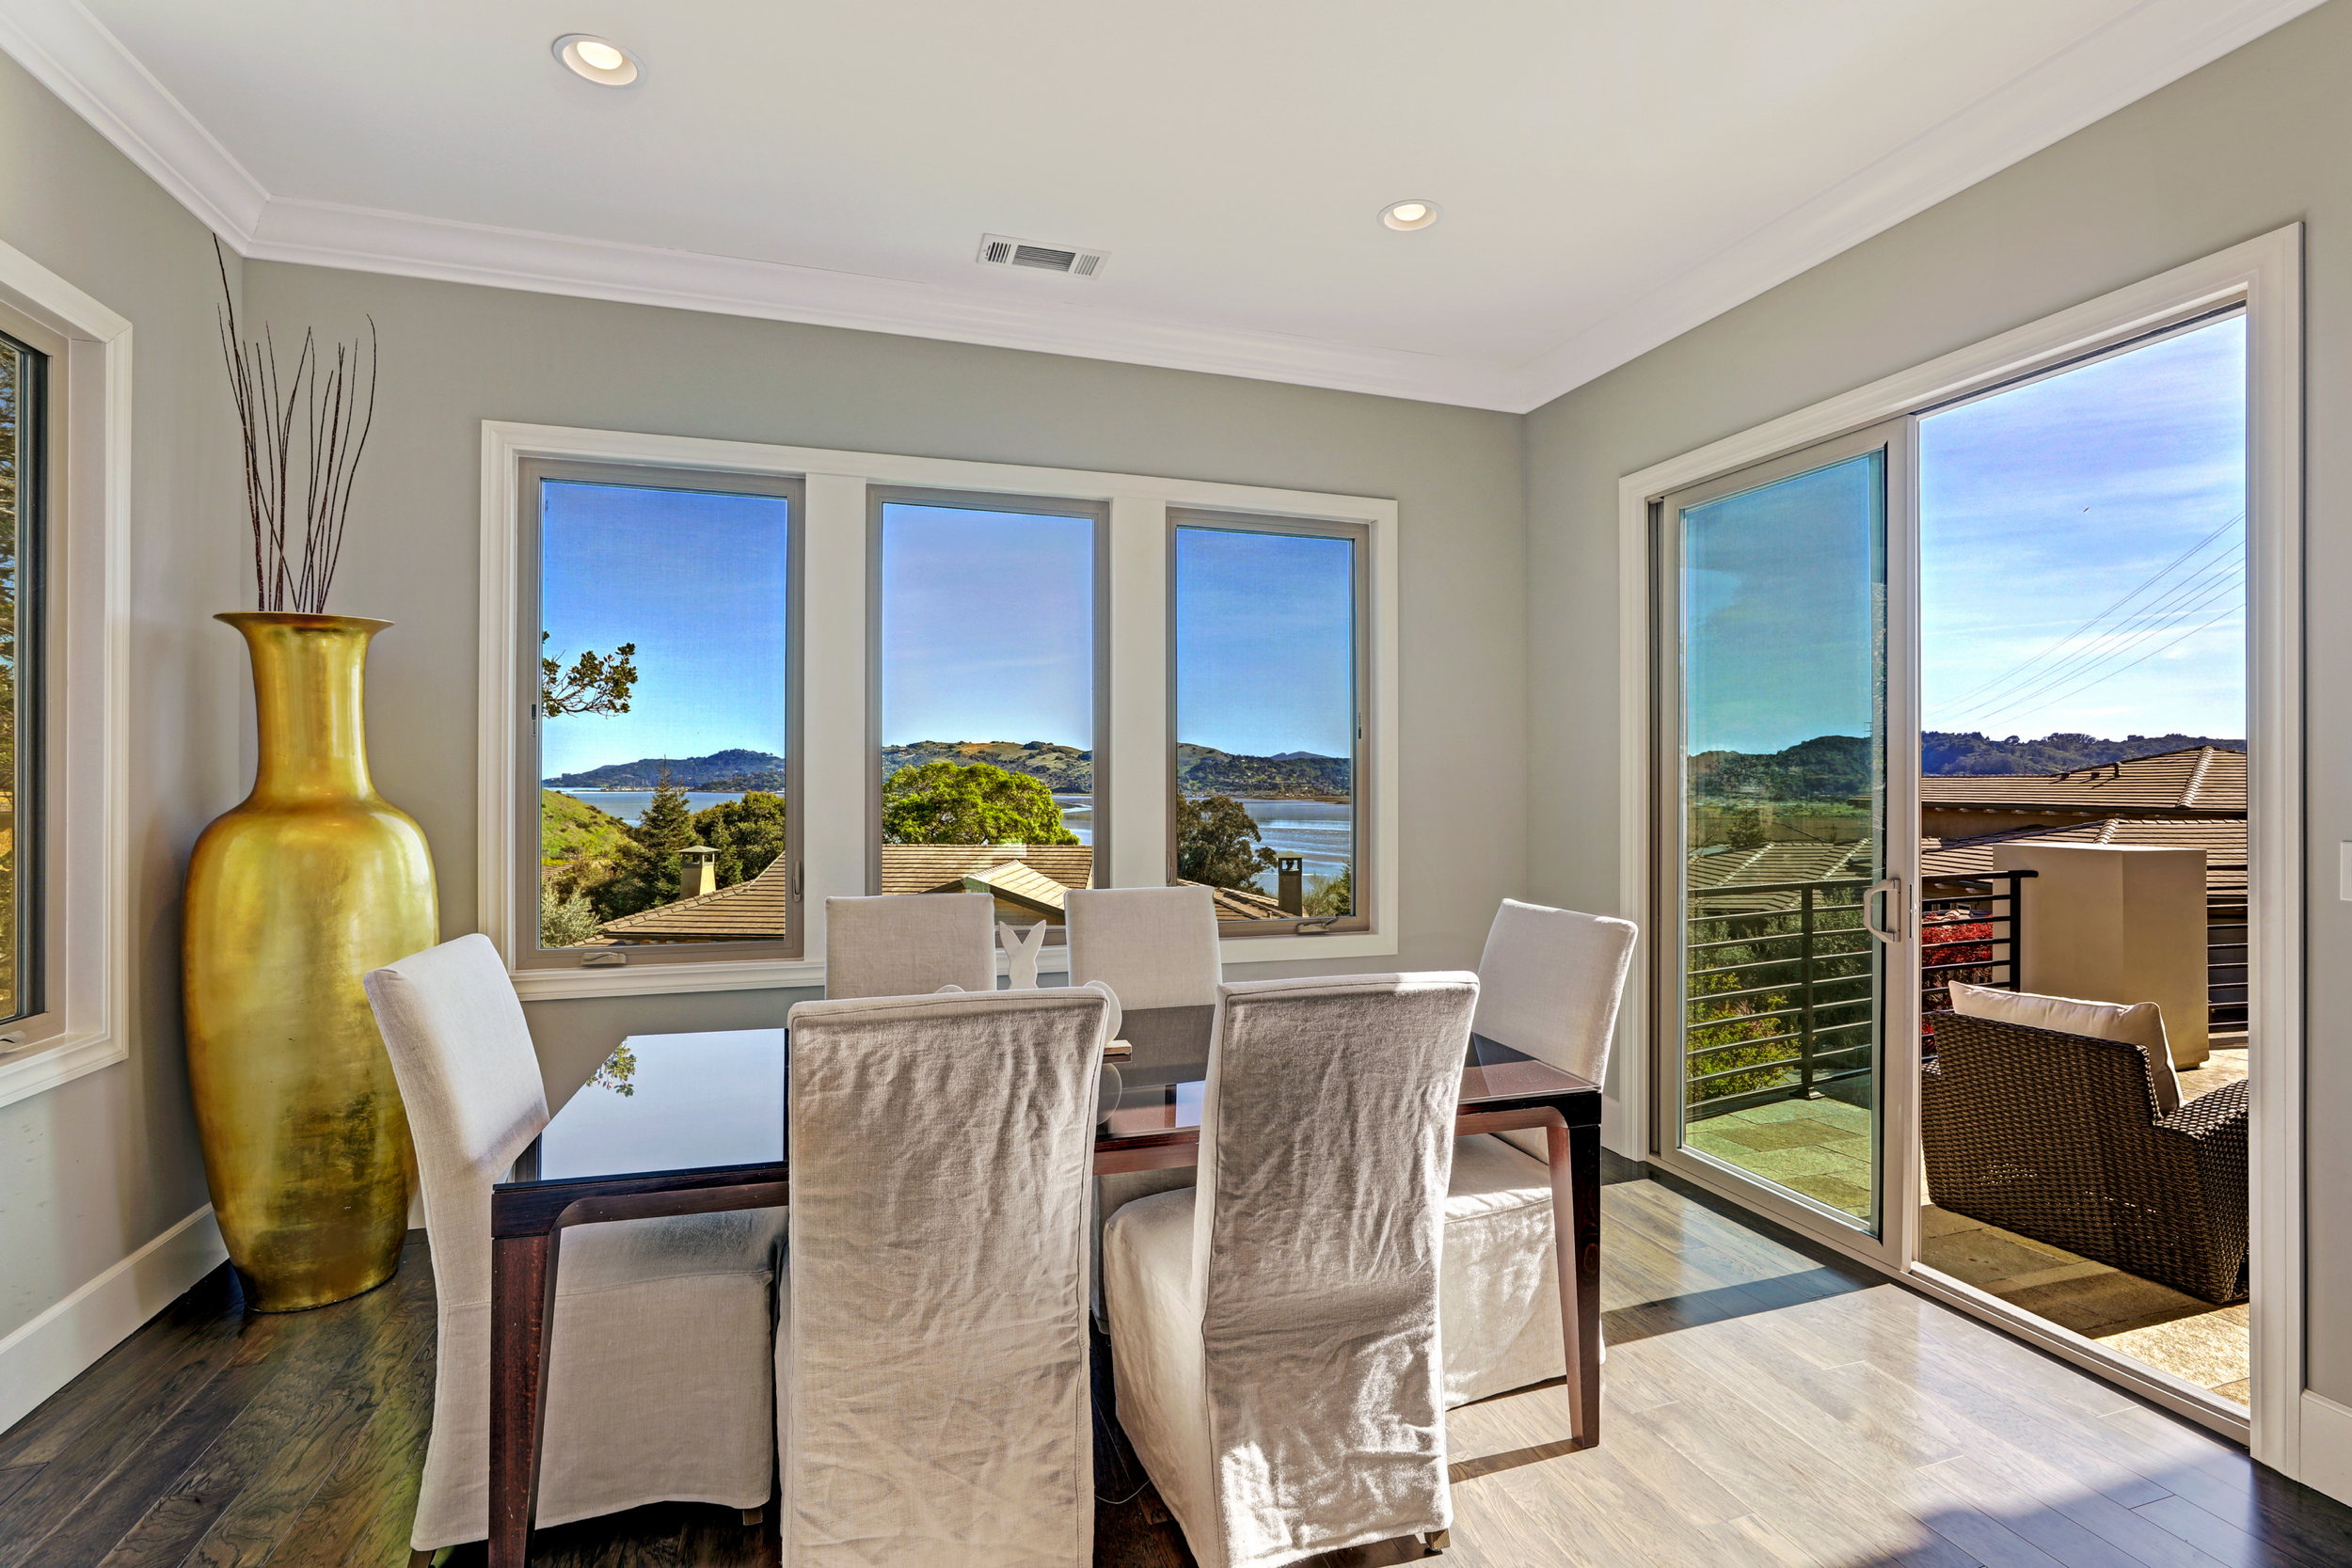 21 Drakes Cove Larkspur Best Realtor 19 MLS - Own Marin Pacific Union - Best Realtor in Marin County.jpg